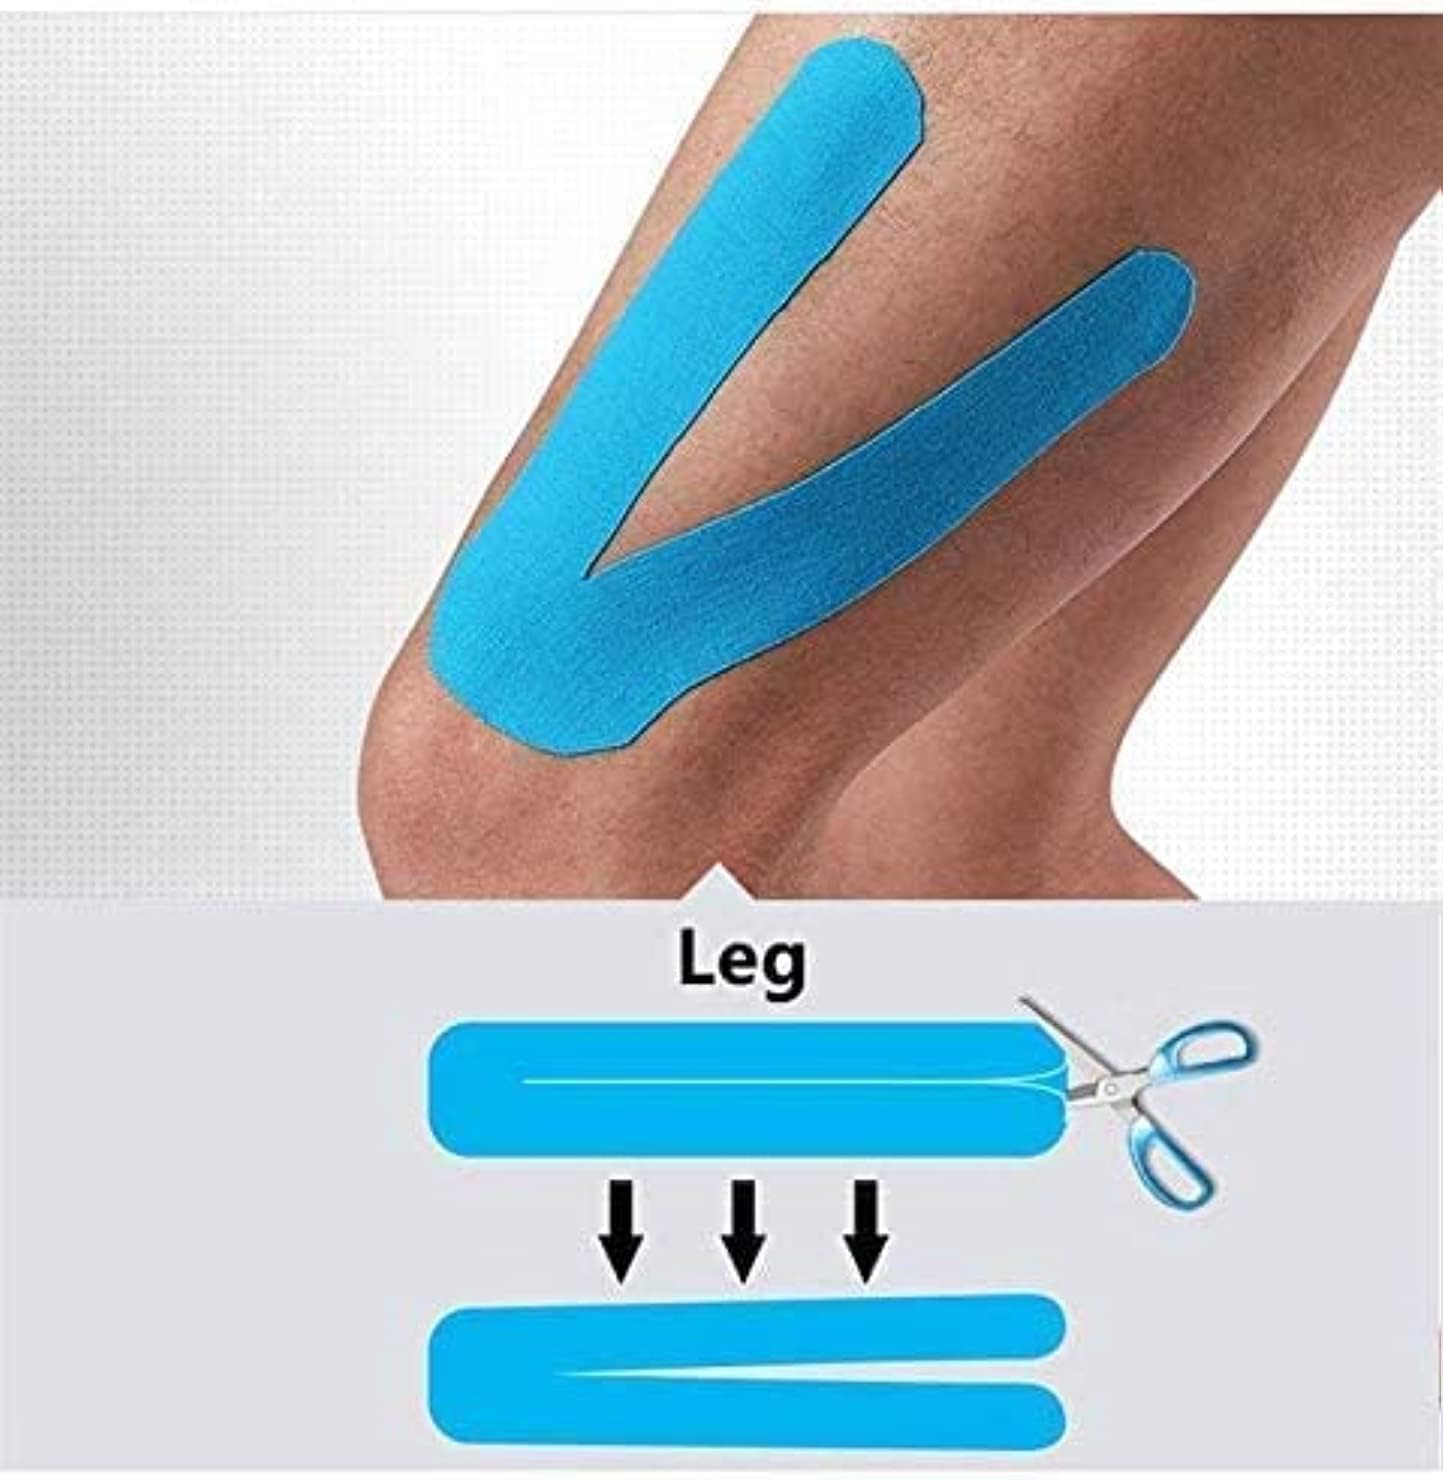 SKEIDO 3pcs Muscle Tape 5cm x 5m Sports Tape Kinesiology Tape Cotton Elastic Adhesive Muscle Bandage Care Physio Strain Injury Support